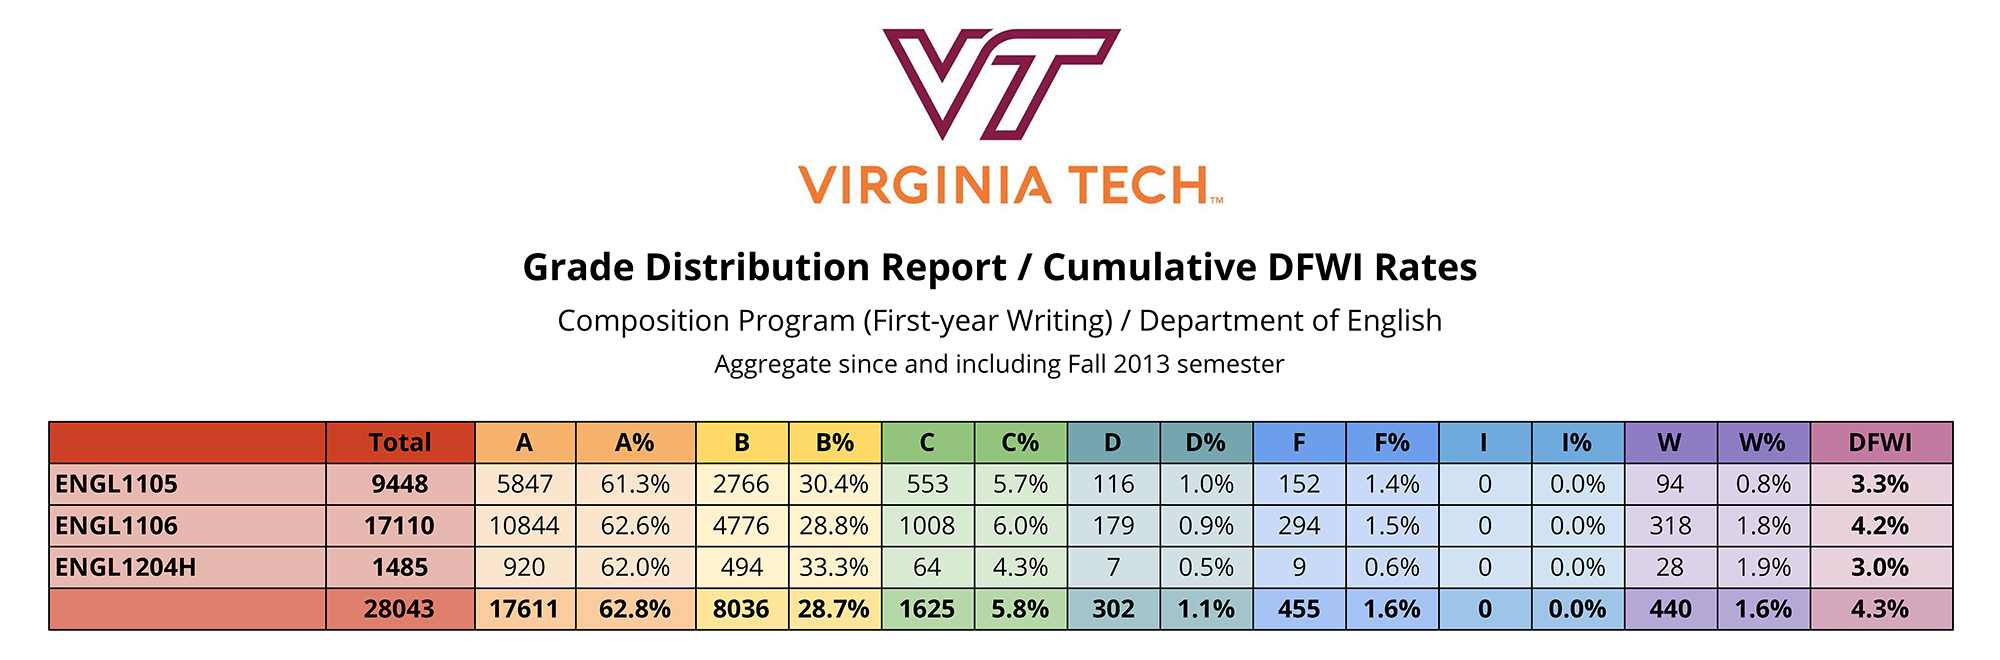 Table 2. This table presents aggregate grade information over five years from sections of first-year writing at Virginia Tech. Out of the 28,043 students tabulated, 4.3%, or 1,206 students were assigned a D, an F, or a W.